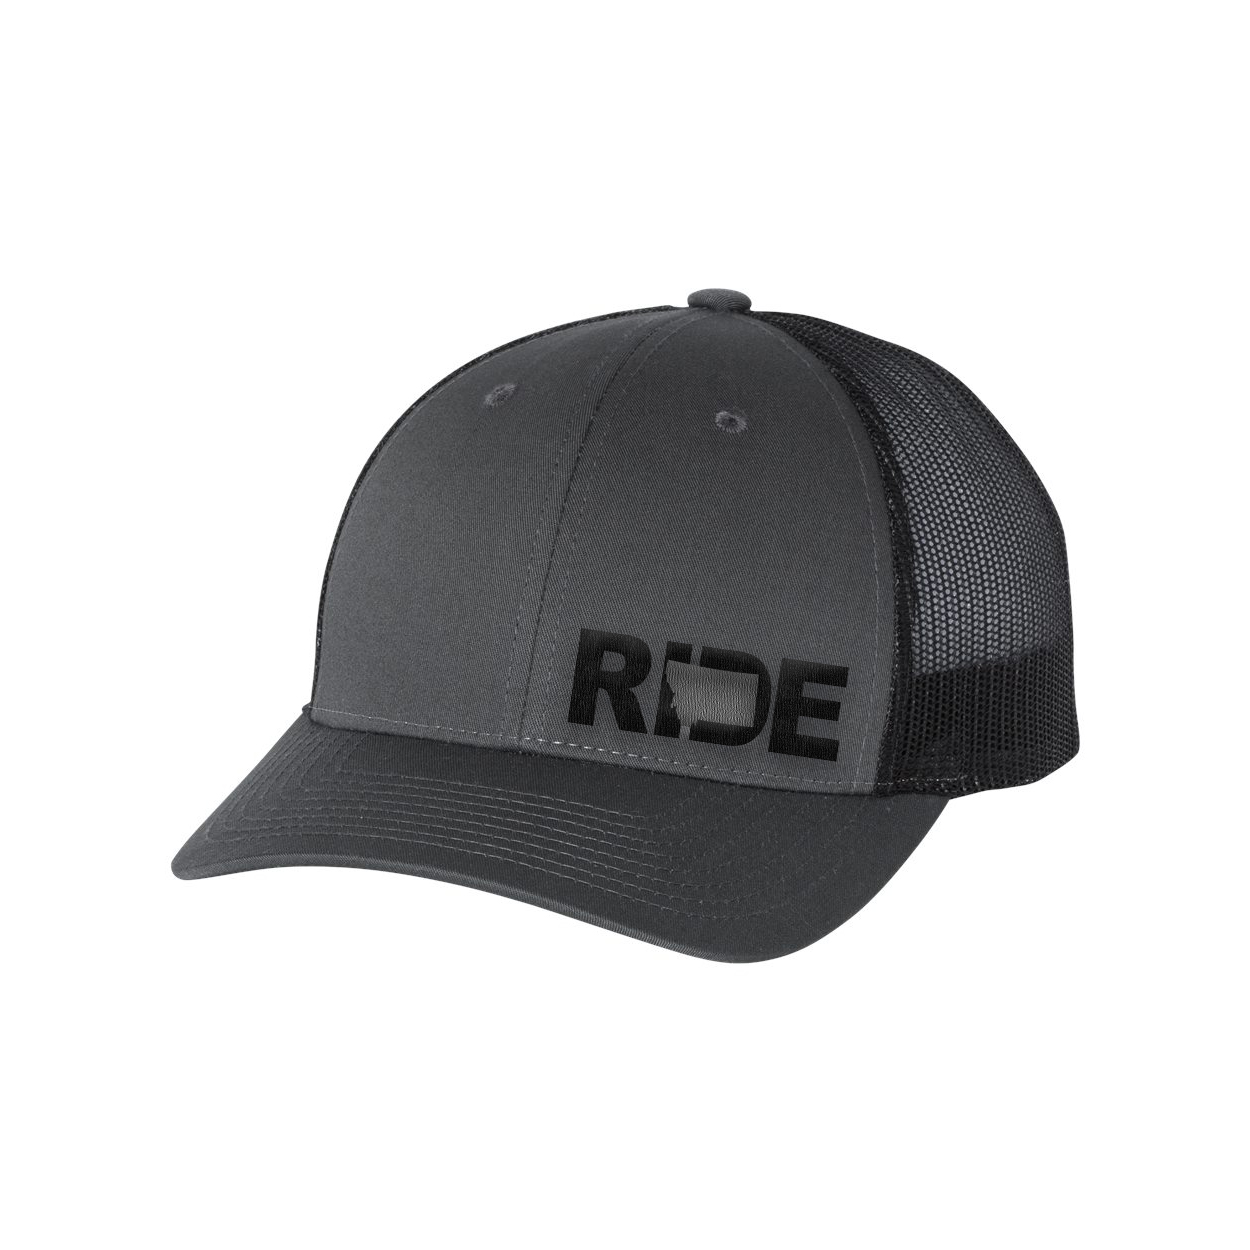 Ride Montana Night Out Pro Embroidered Snapback Trucker Hat Gray/Black